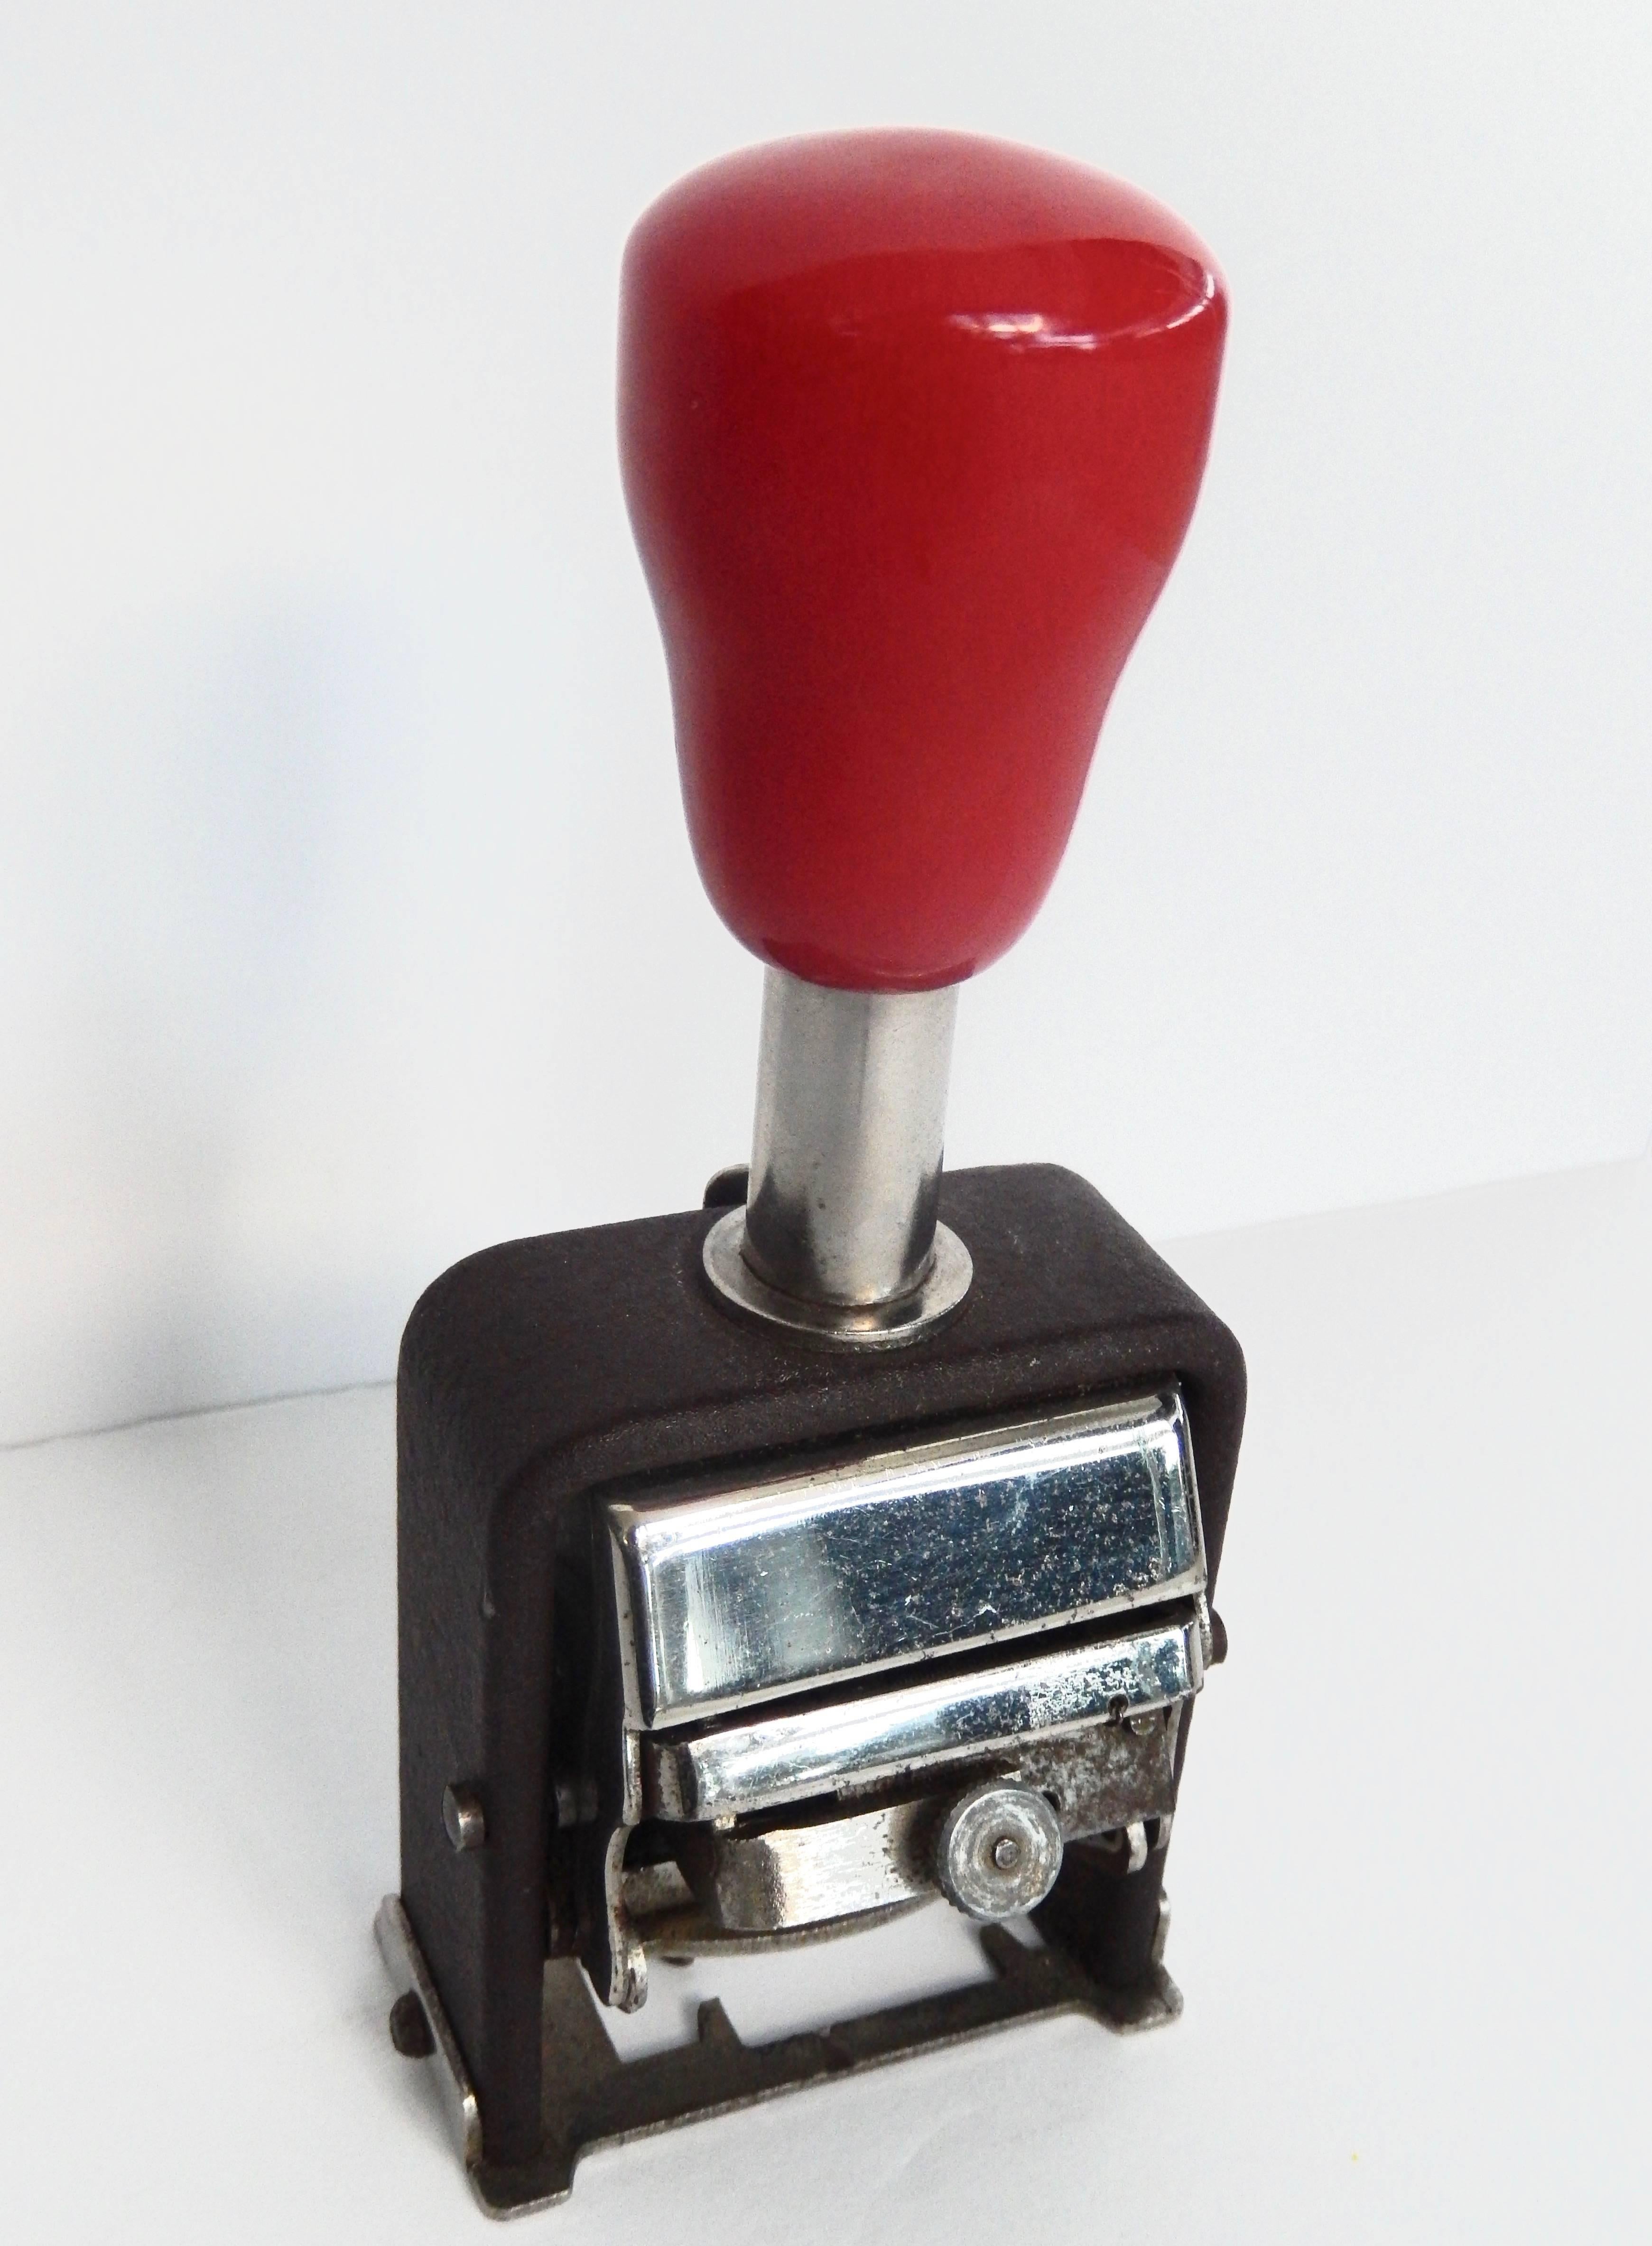 American Art Deco/Red Handled Industrial Vintage Numbering Machine In Good Condition For Sale In Winnetka, IL